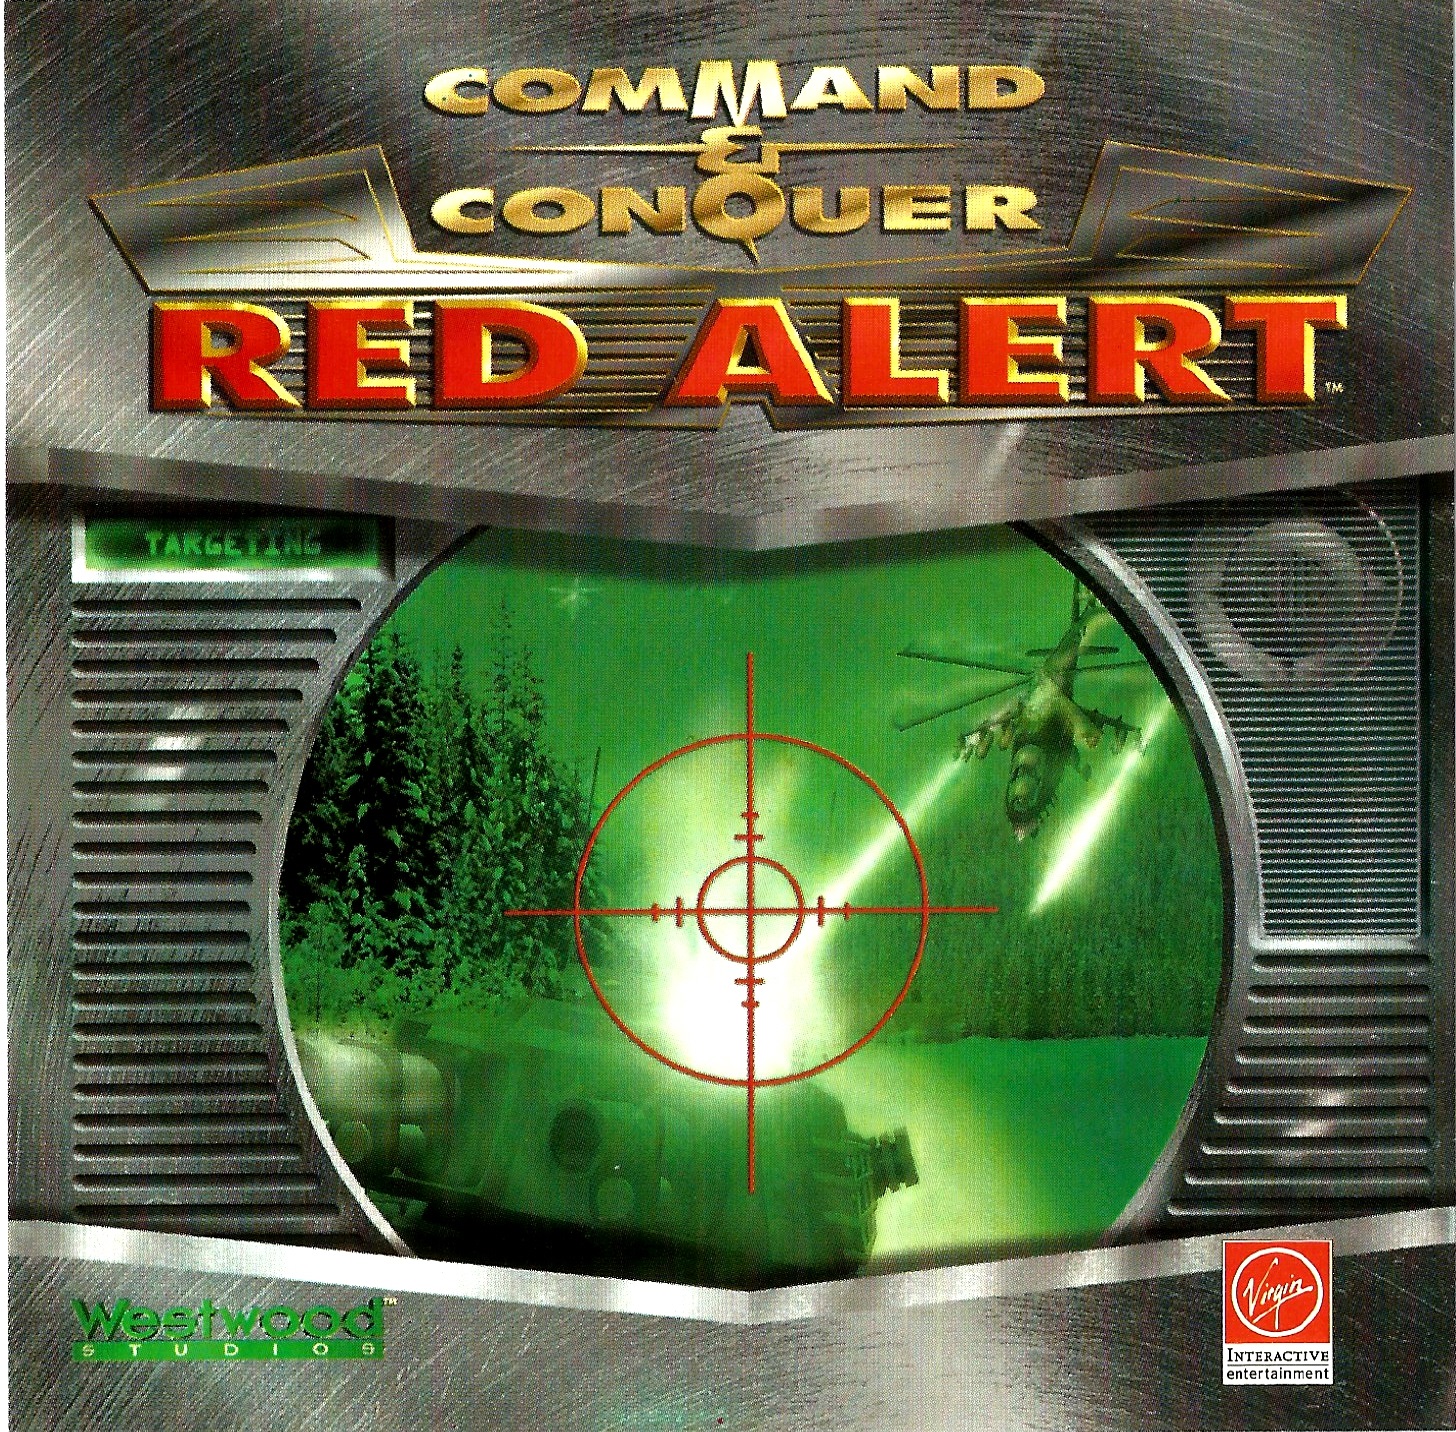 Red Alert ps1. Red Alert 1. Command and Conquer Red Alert ps1. Command Conquer Red Alert 1996. Red alert soundtrack